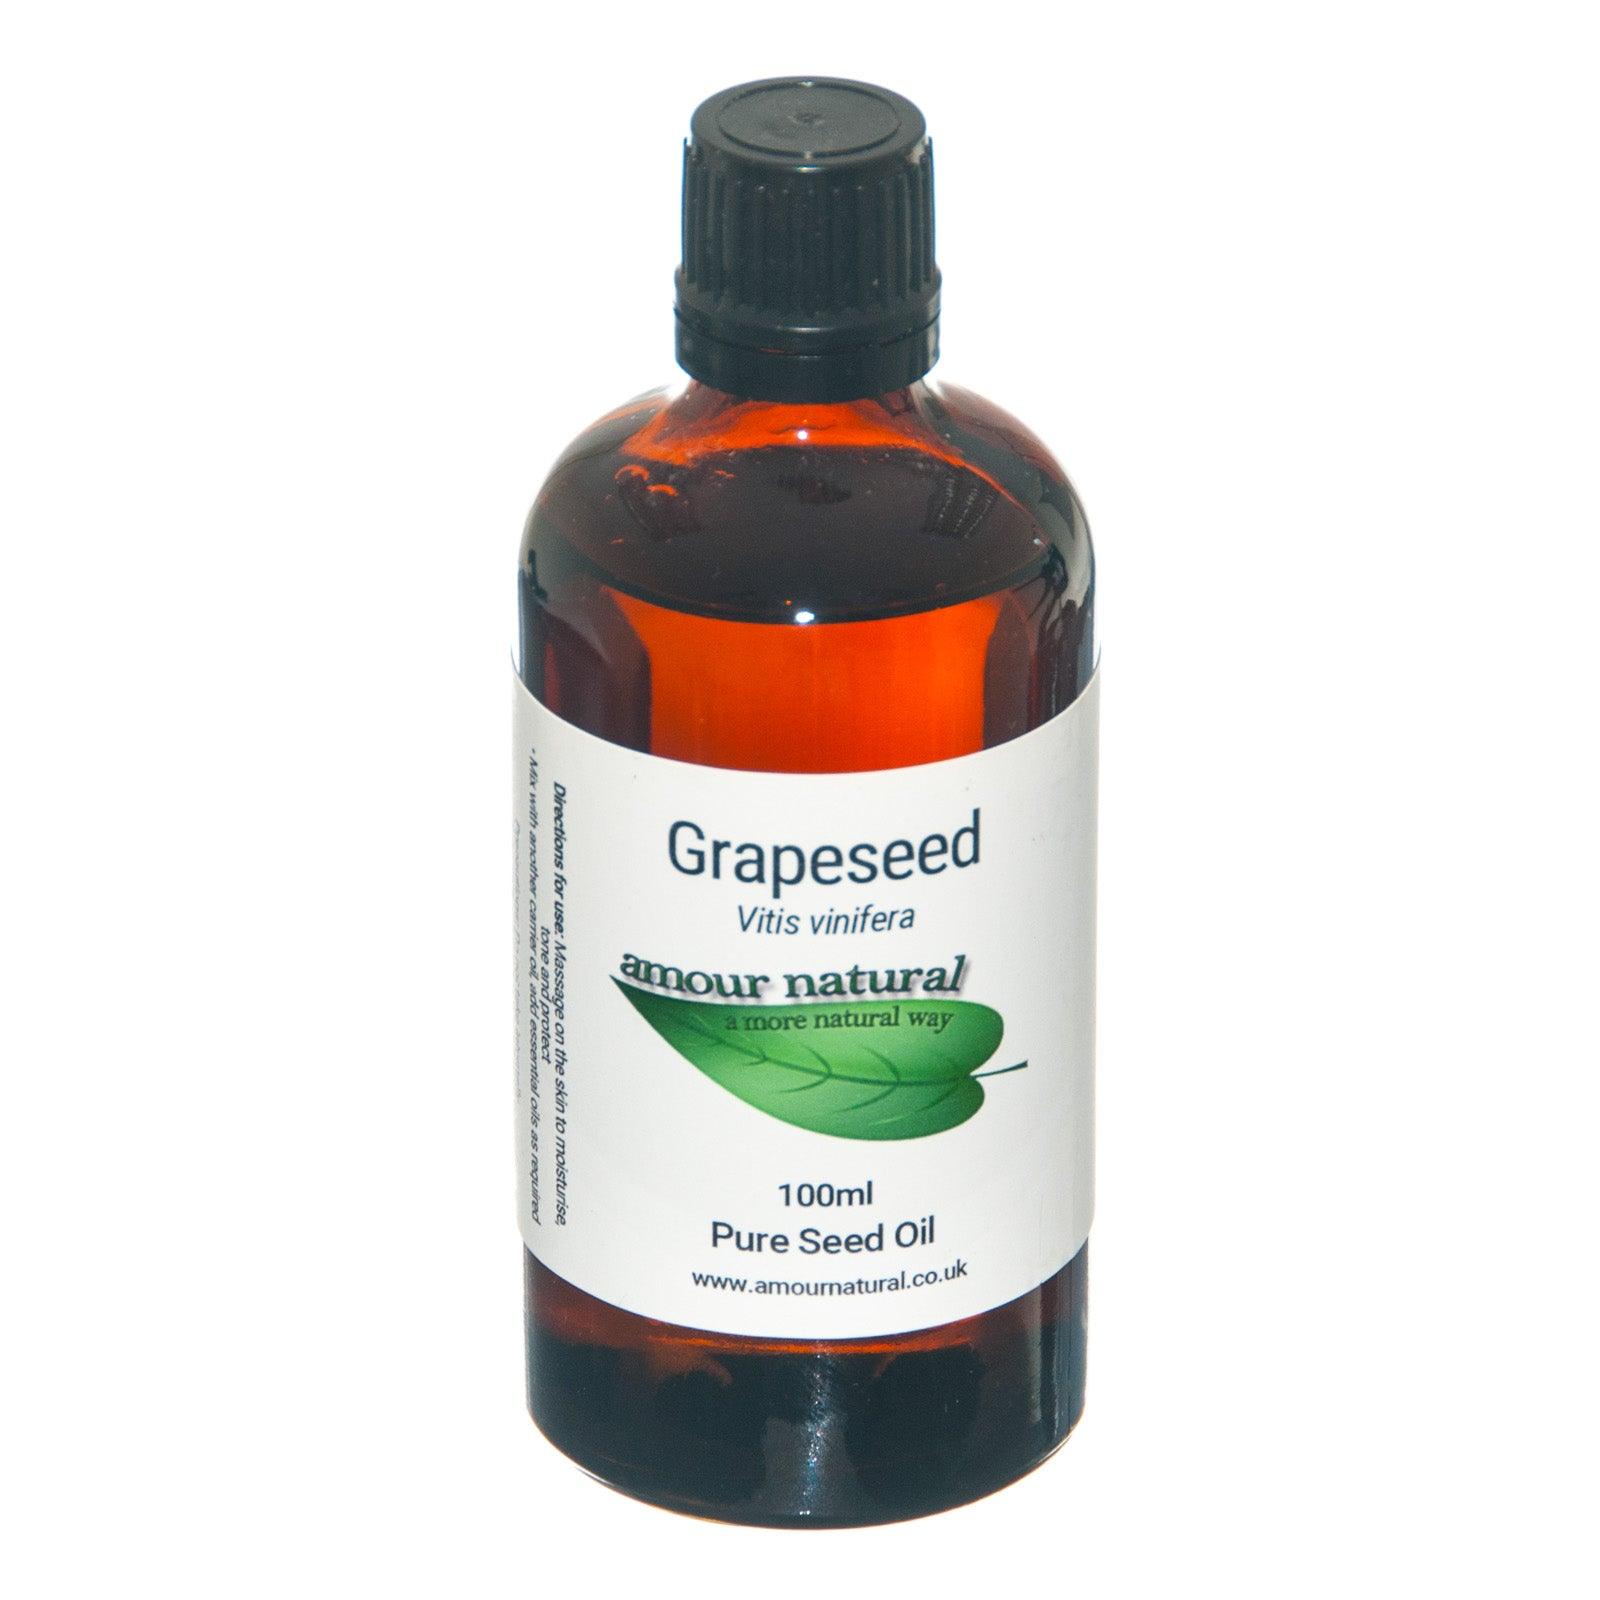 Amour Natural Grapeseed Pure Seed Oil 100ml - Approved Vitamins